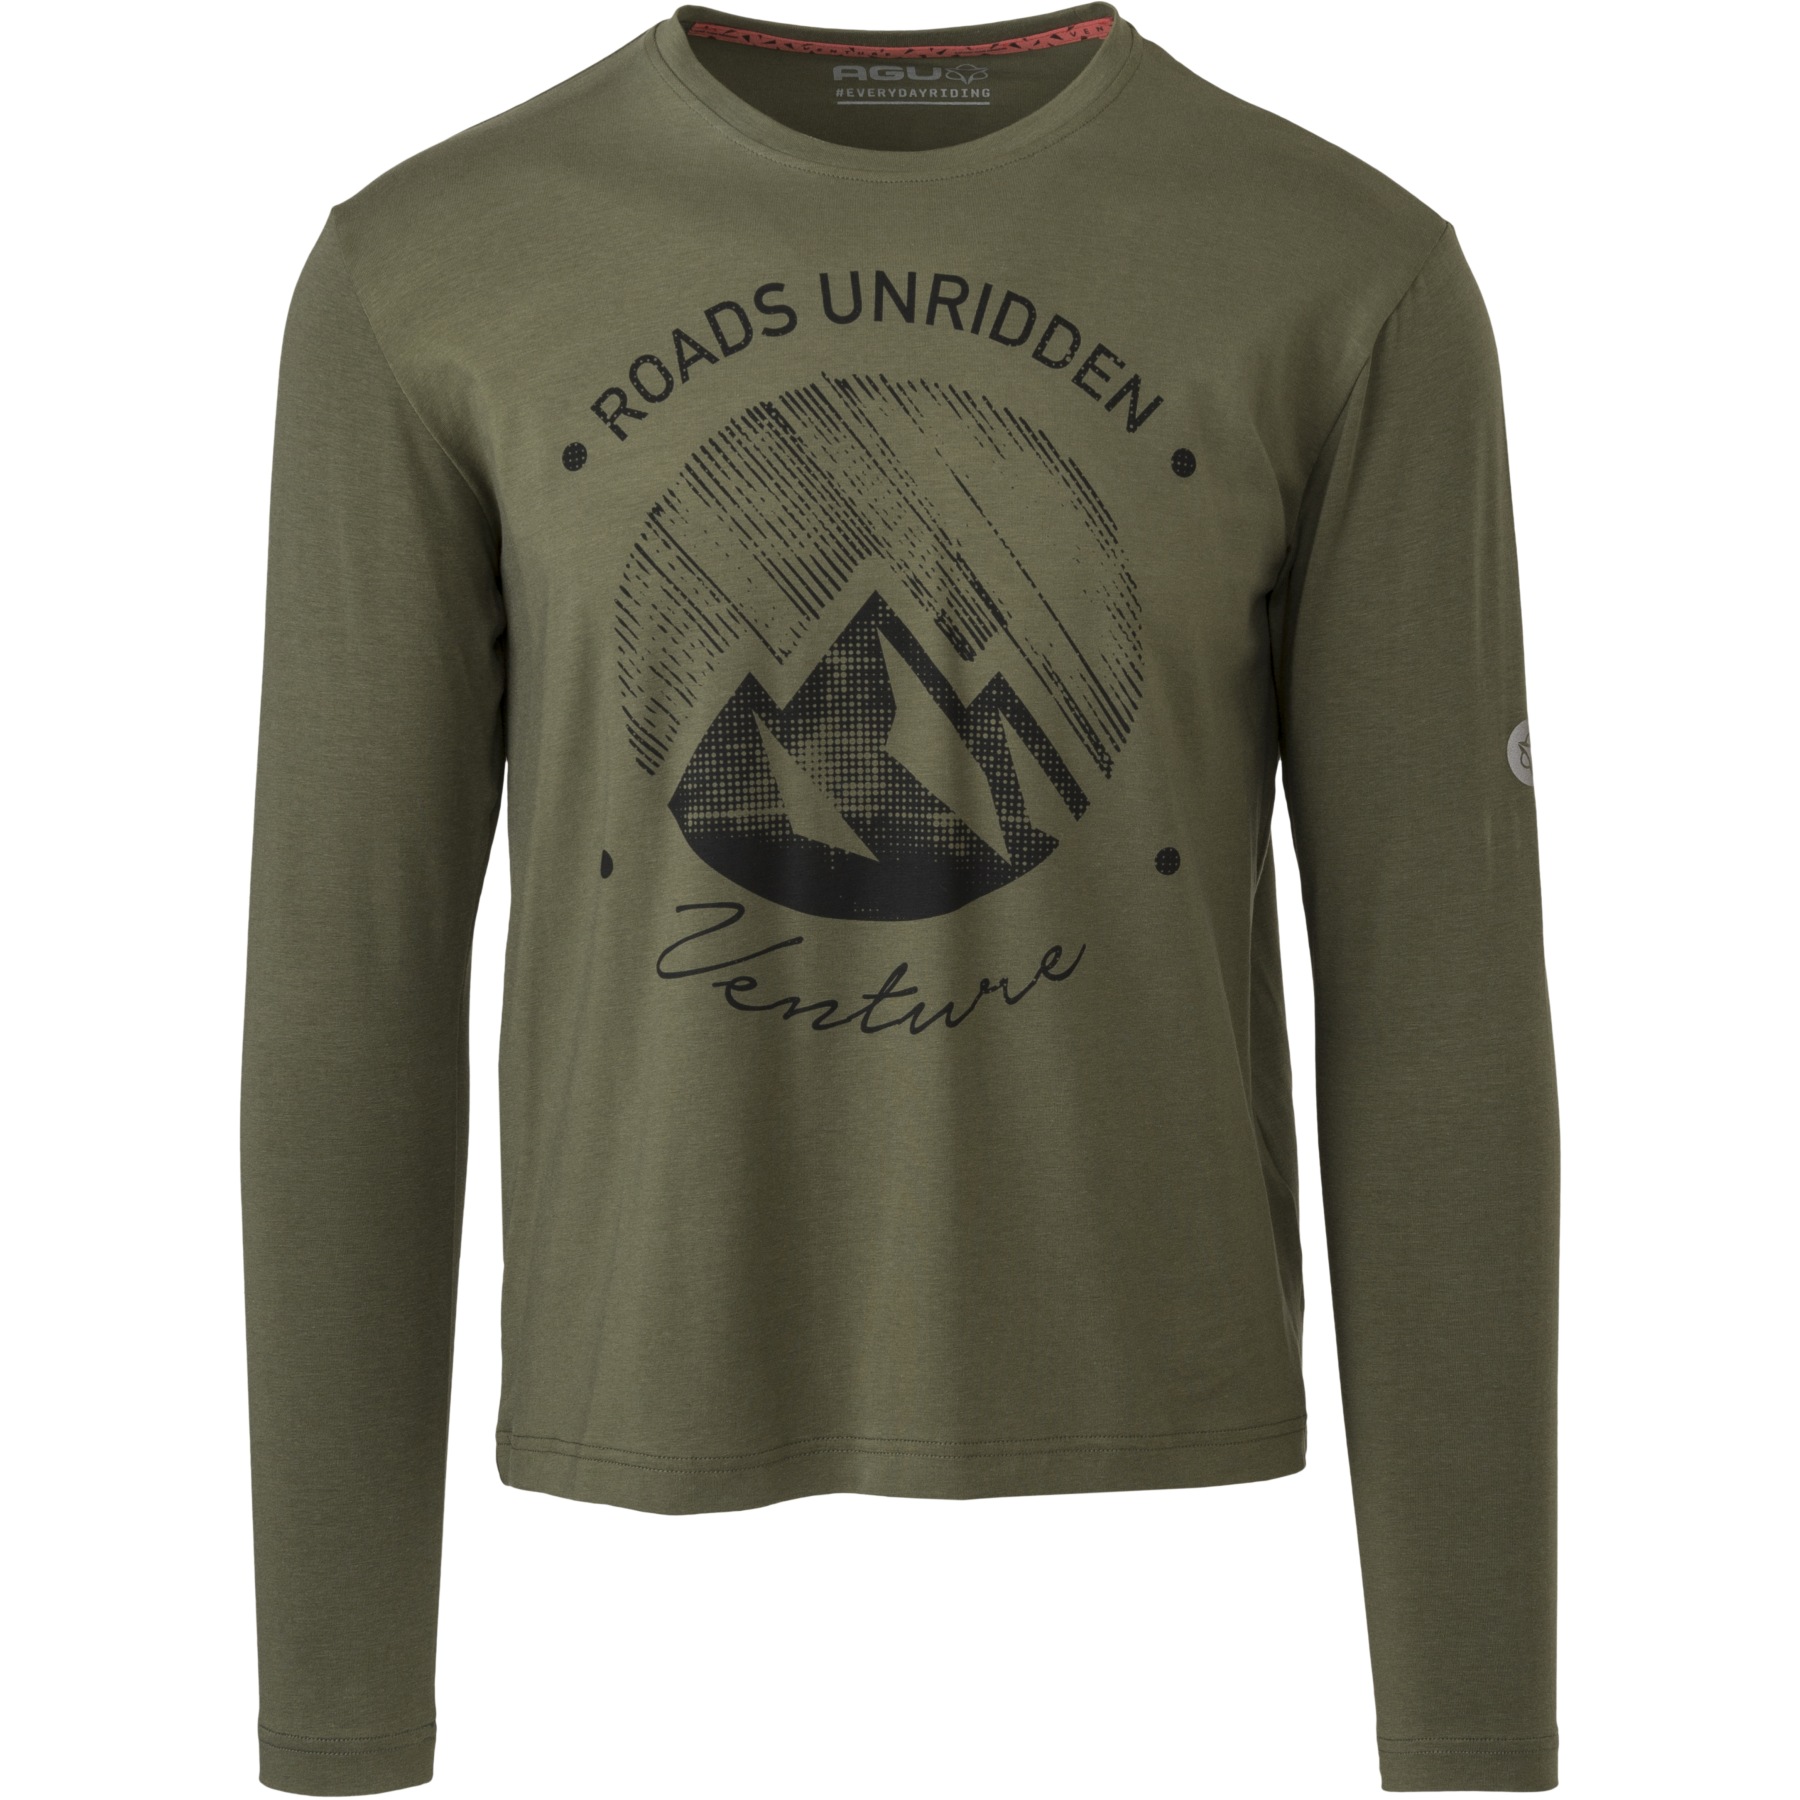 Image of AGU Venture Casual Performer Long Sleeve T-Shirt Unisex - army green